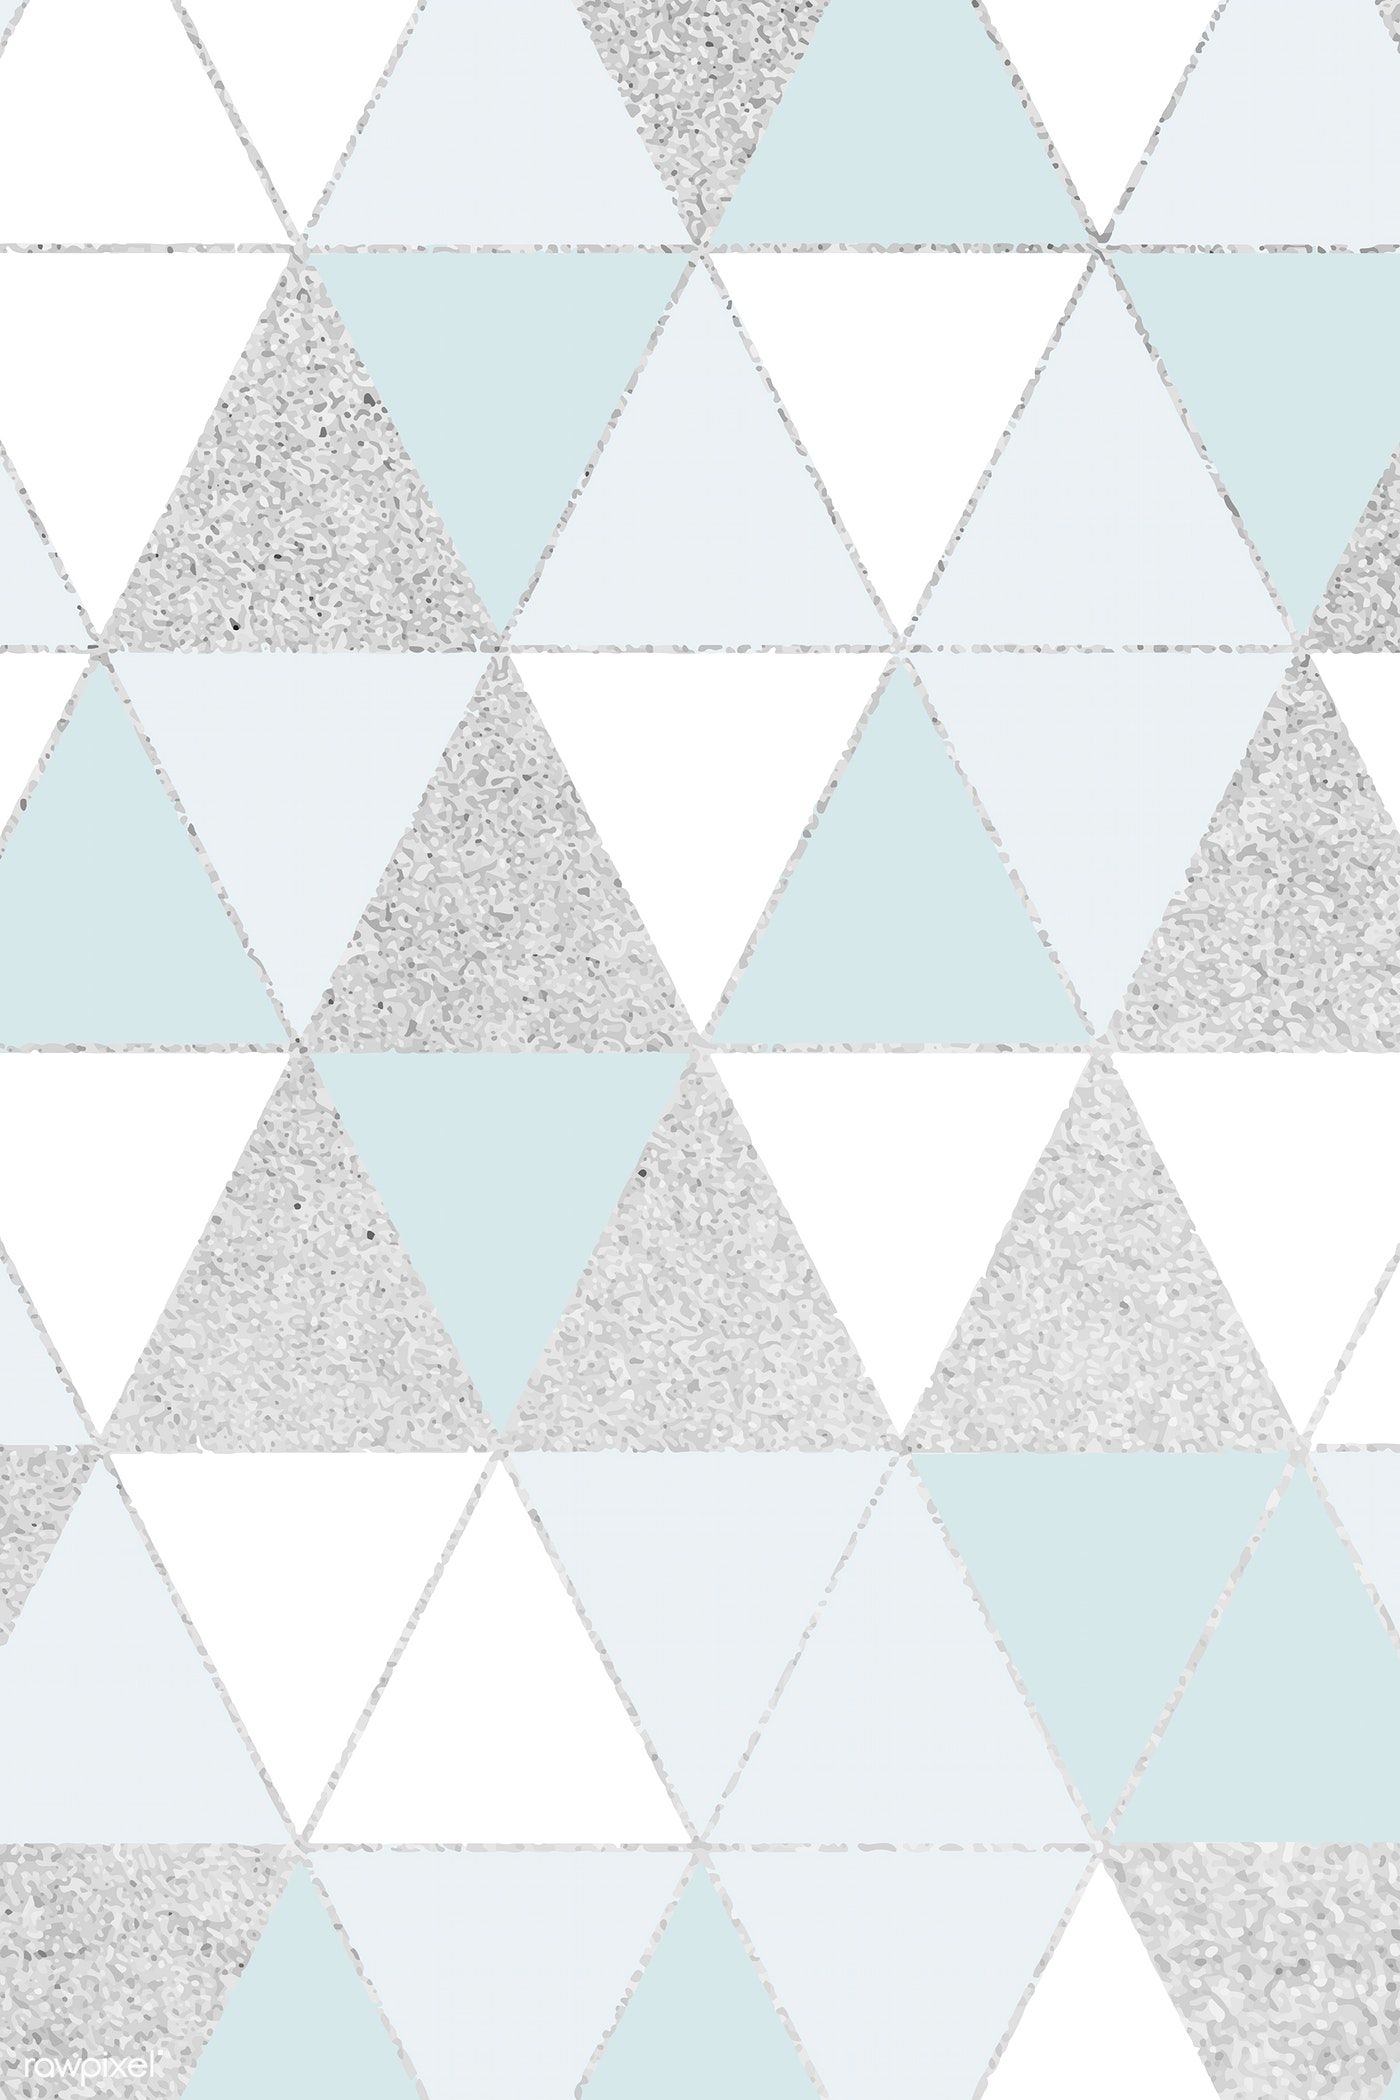 Premium Vector Of Gray Glittery Patterned Background